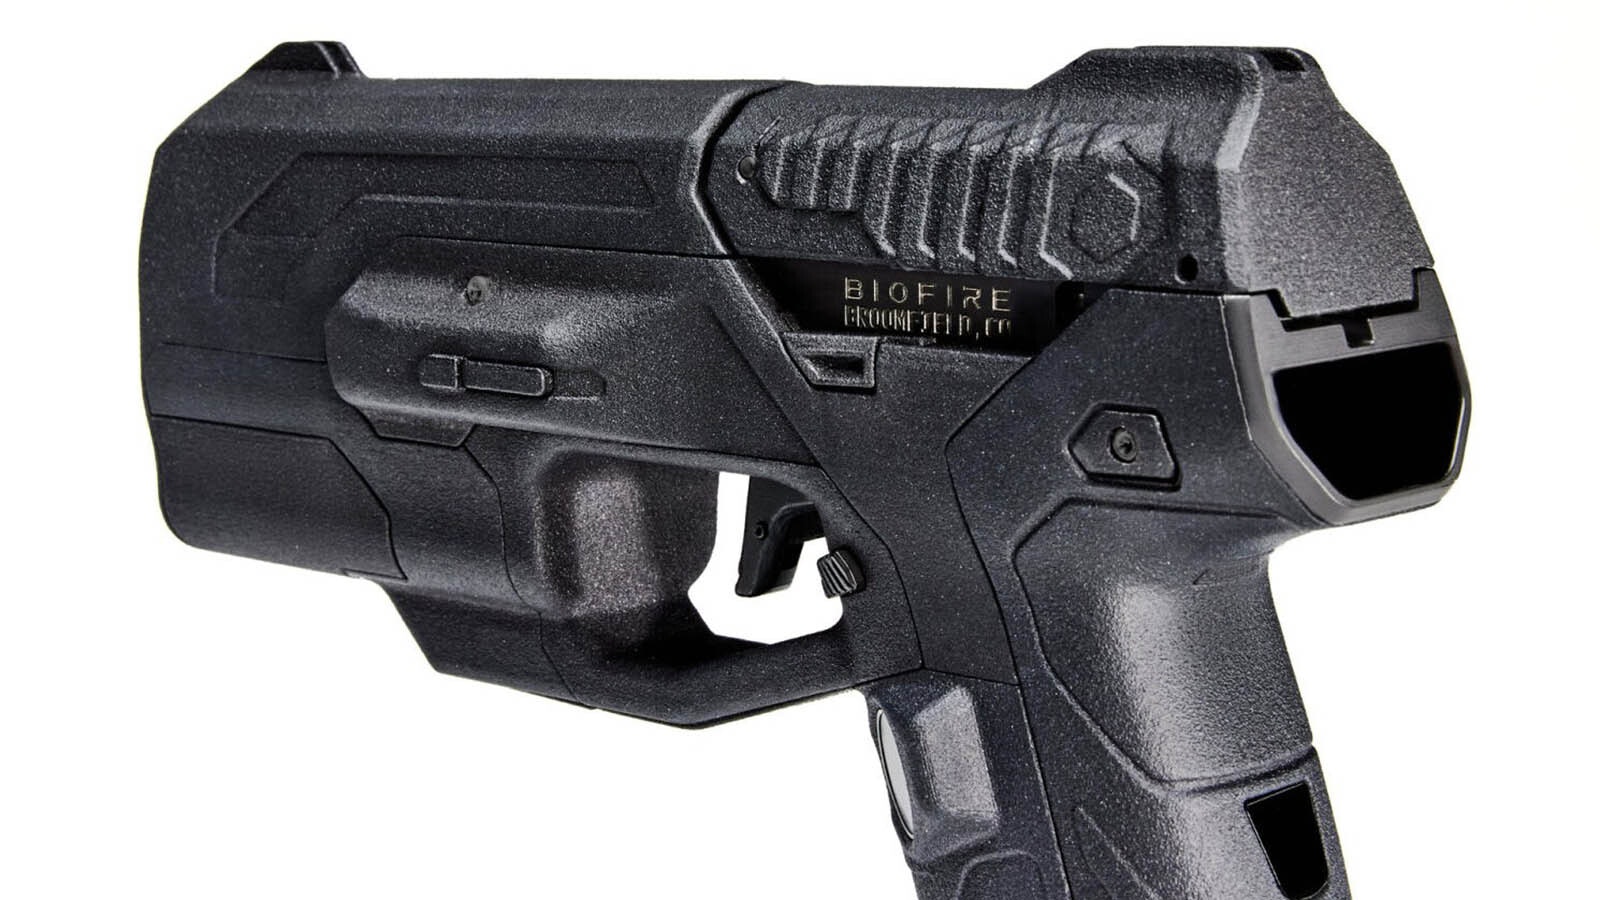 The "smart" firearms made by Colorado-based Biofire have fingerprint and facial recognition technology built in.